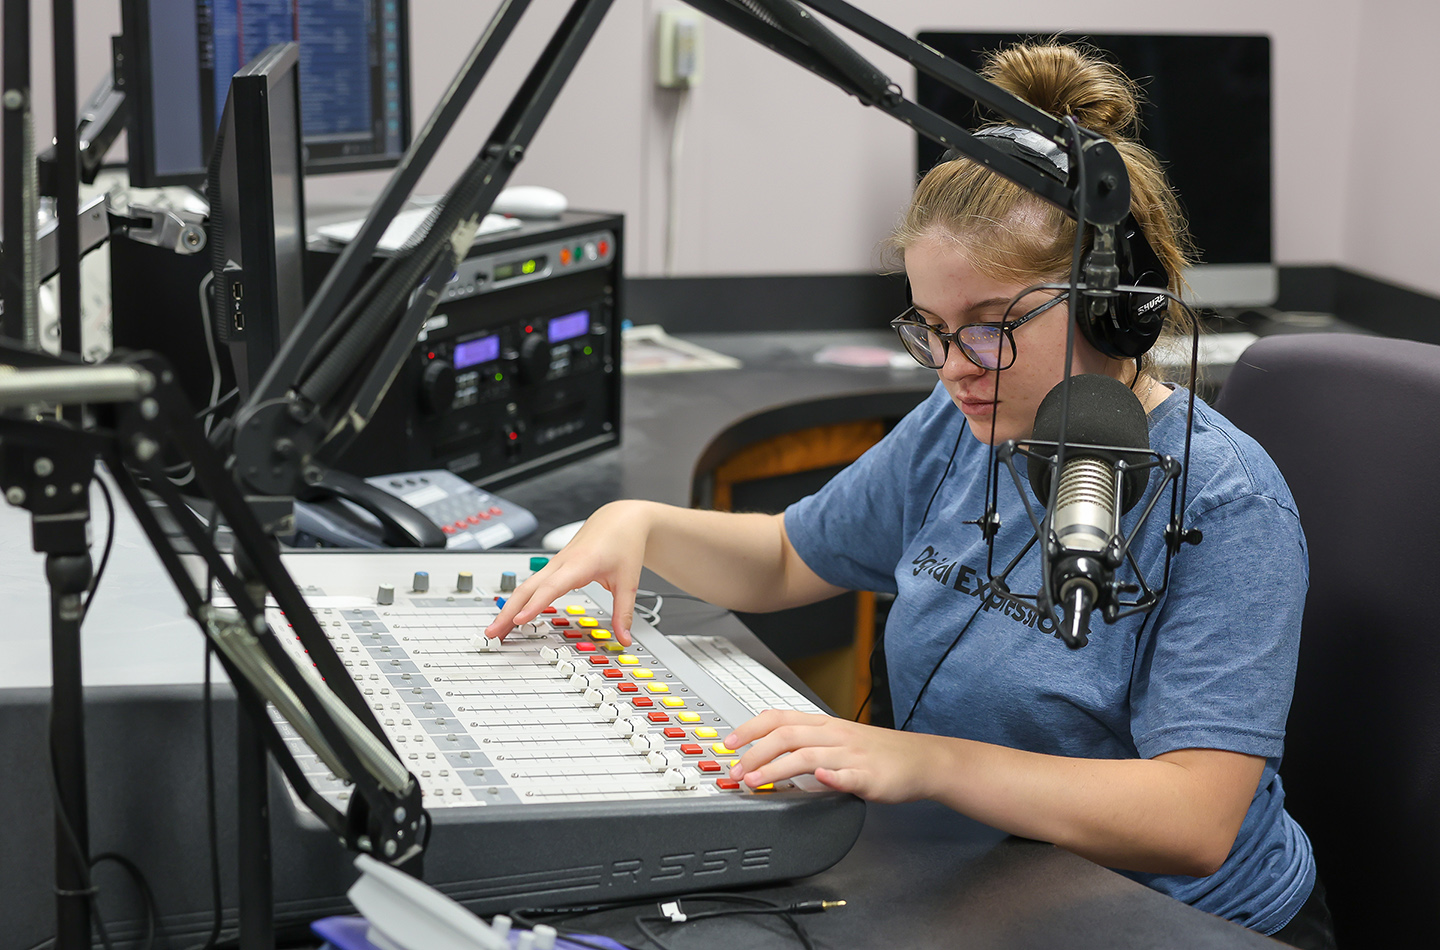 Linley Fegley of Cambridge runs the soundboard in the UNK radio studio during the Digital Expressions Media Camp.